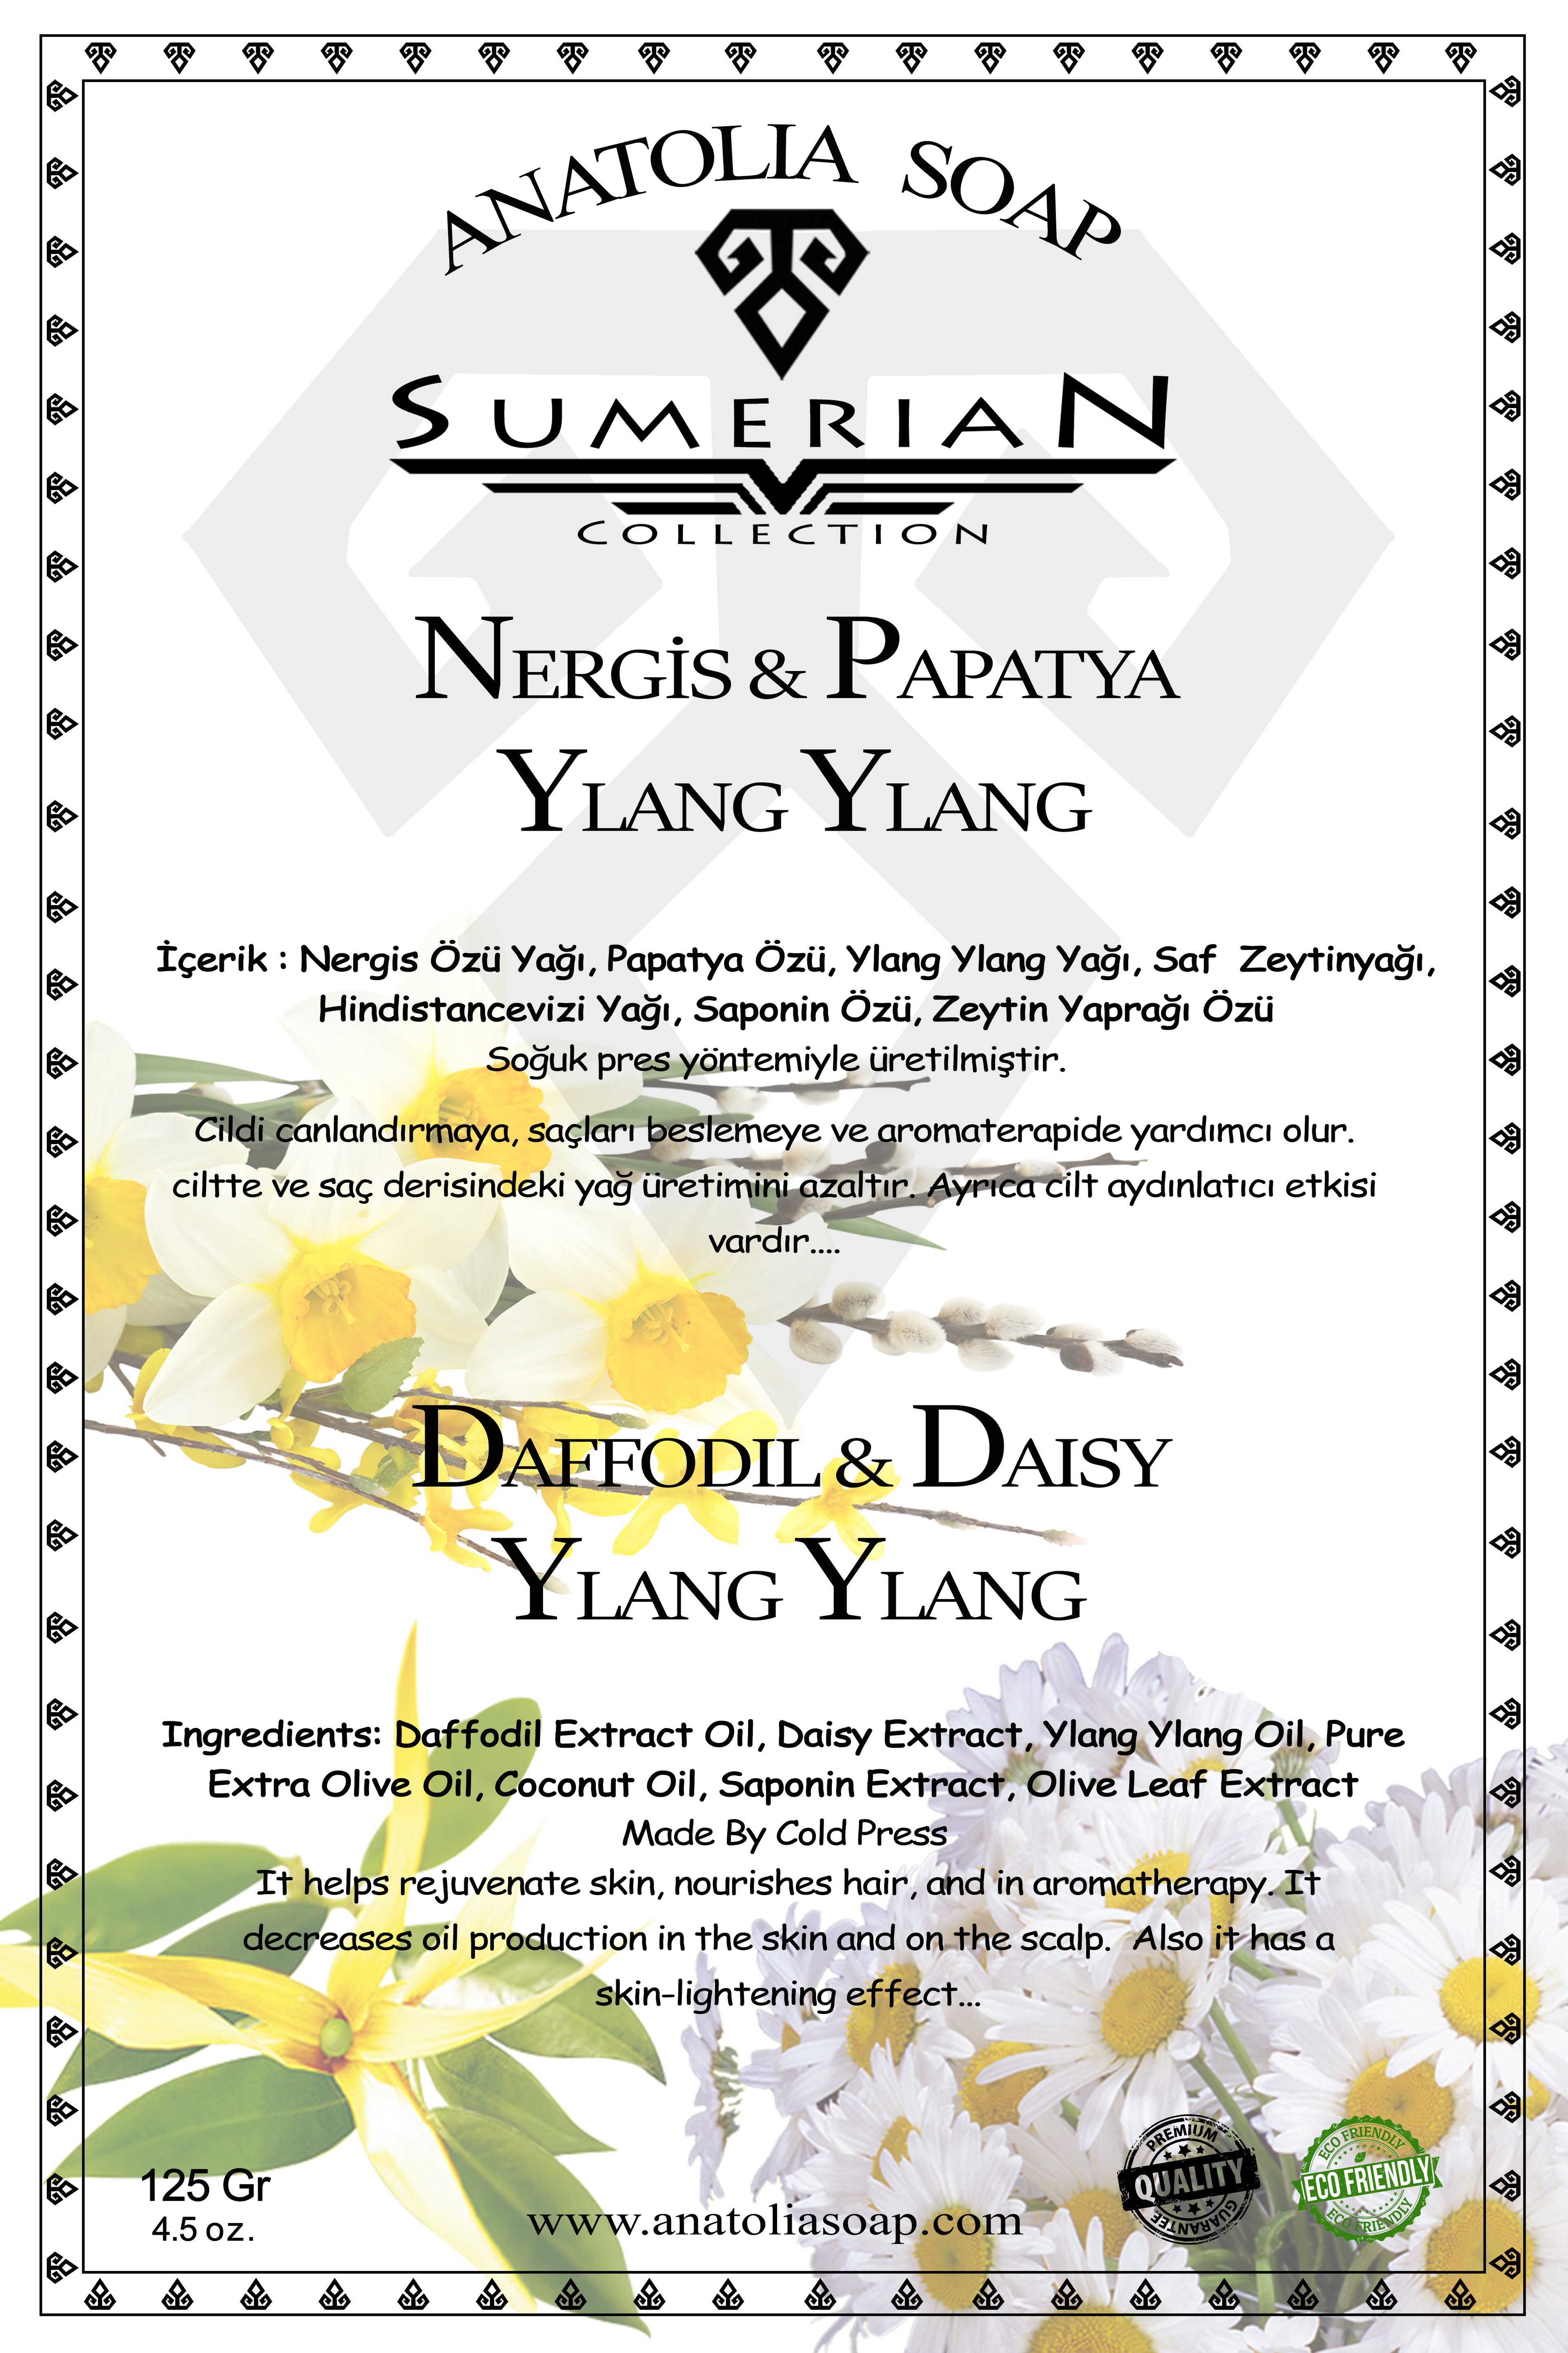 Sumerian Collection Daffodil Daisy Ylang-ylang Soap has Aromatherapy Features and Revitalizes the Skin. Strengthens Weak Hair.